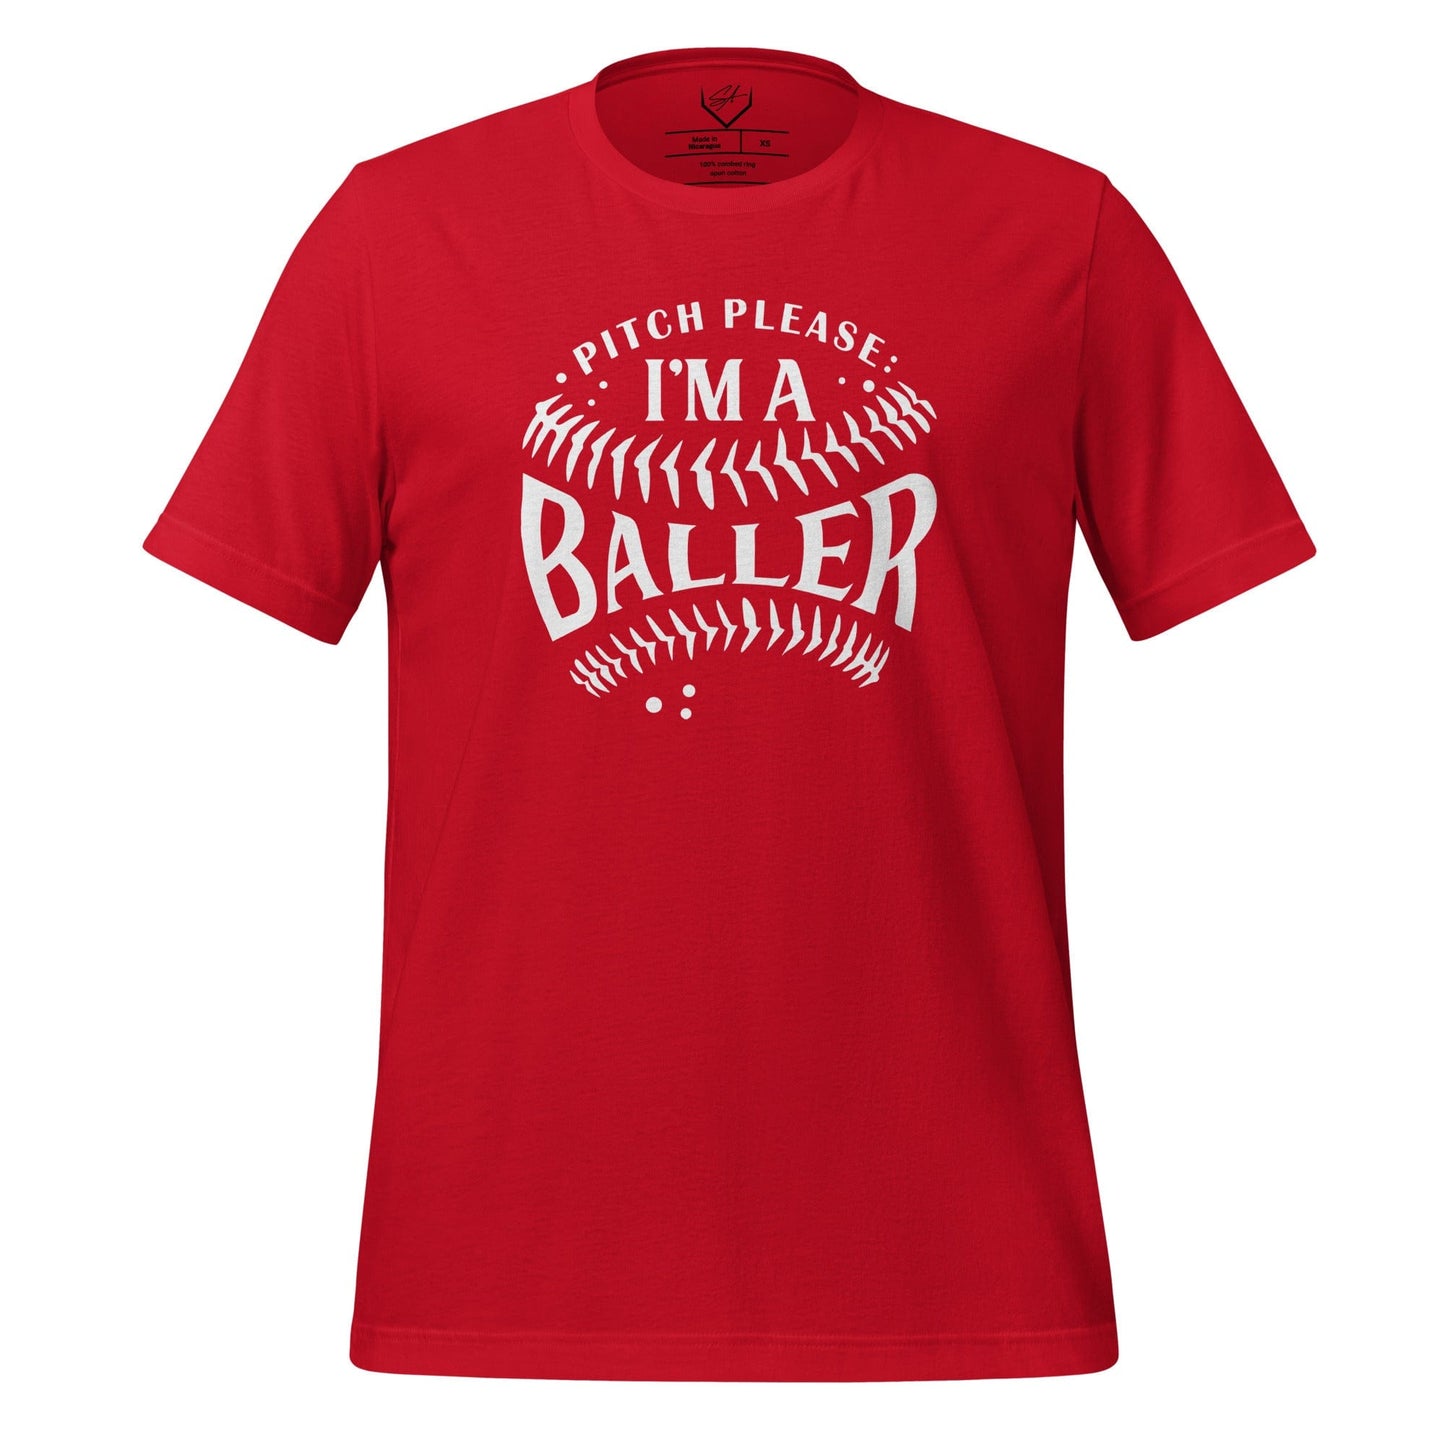 Pitch Please I'm A Baller - Adult Tee